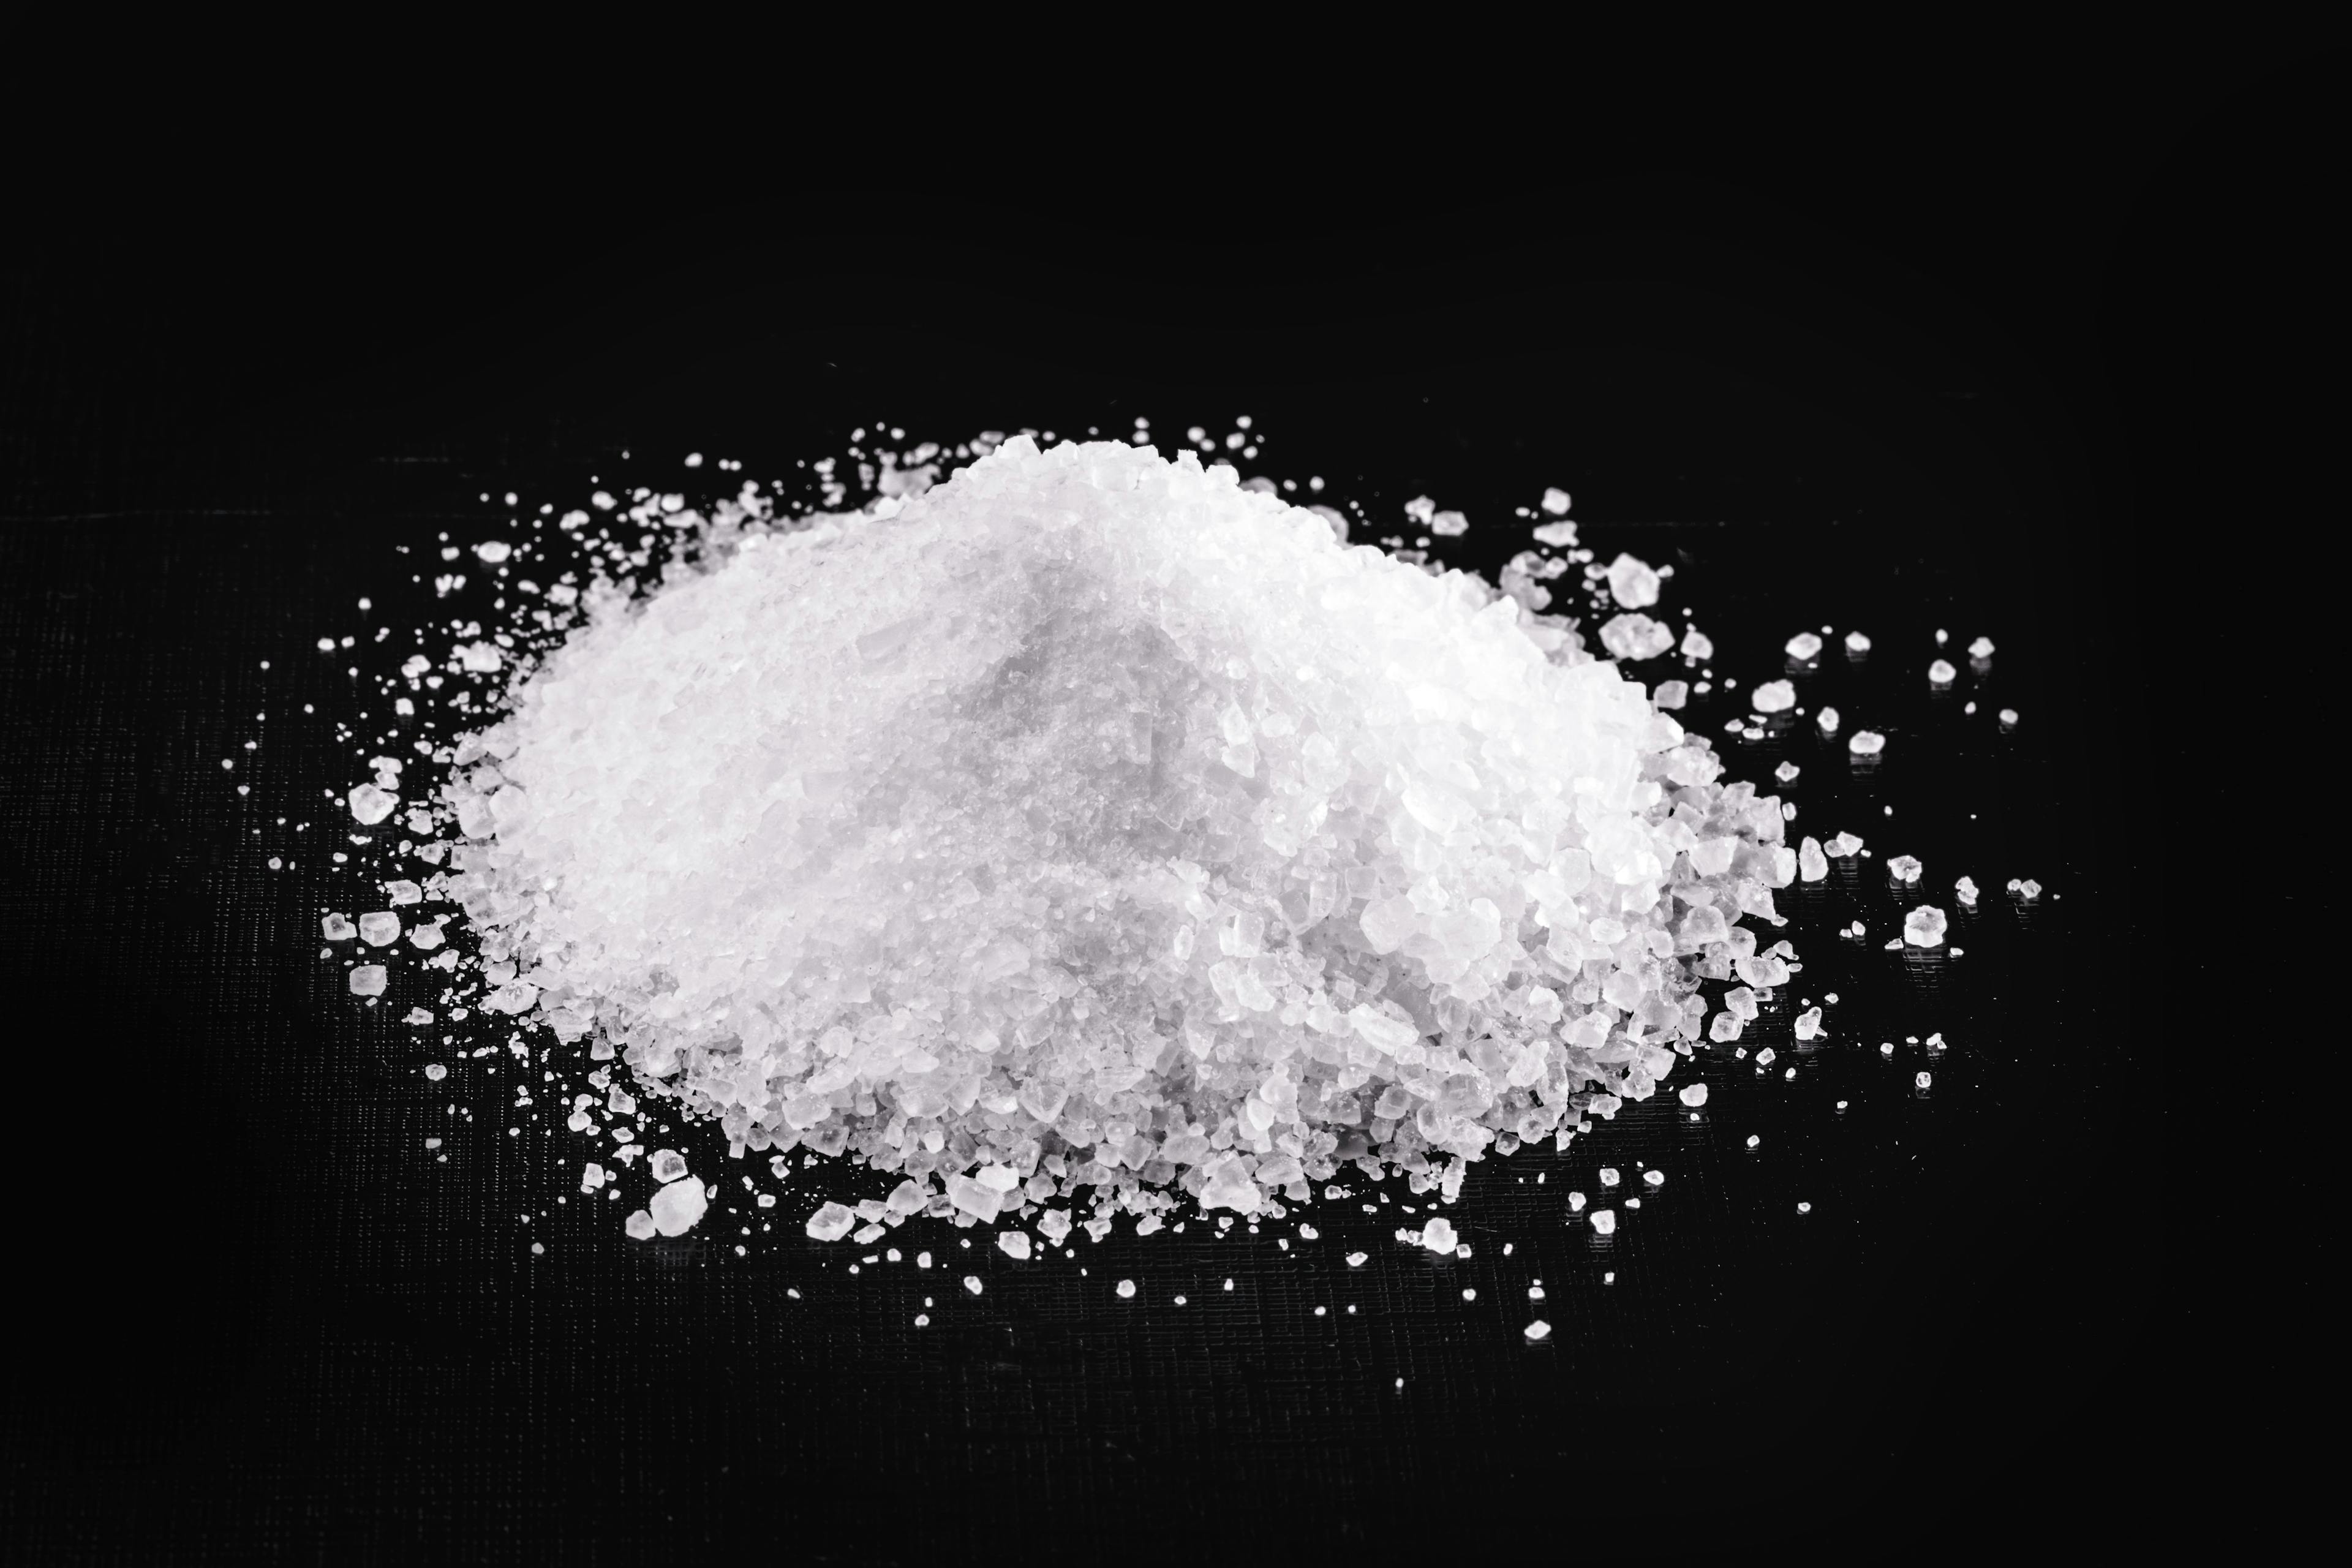 Potassium cyanide or potassium cyanide is a highly toxic chemical compound. | Image Credit: © RHJ - stock.adobe.com.